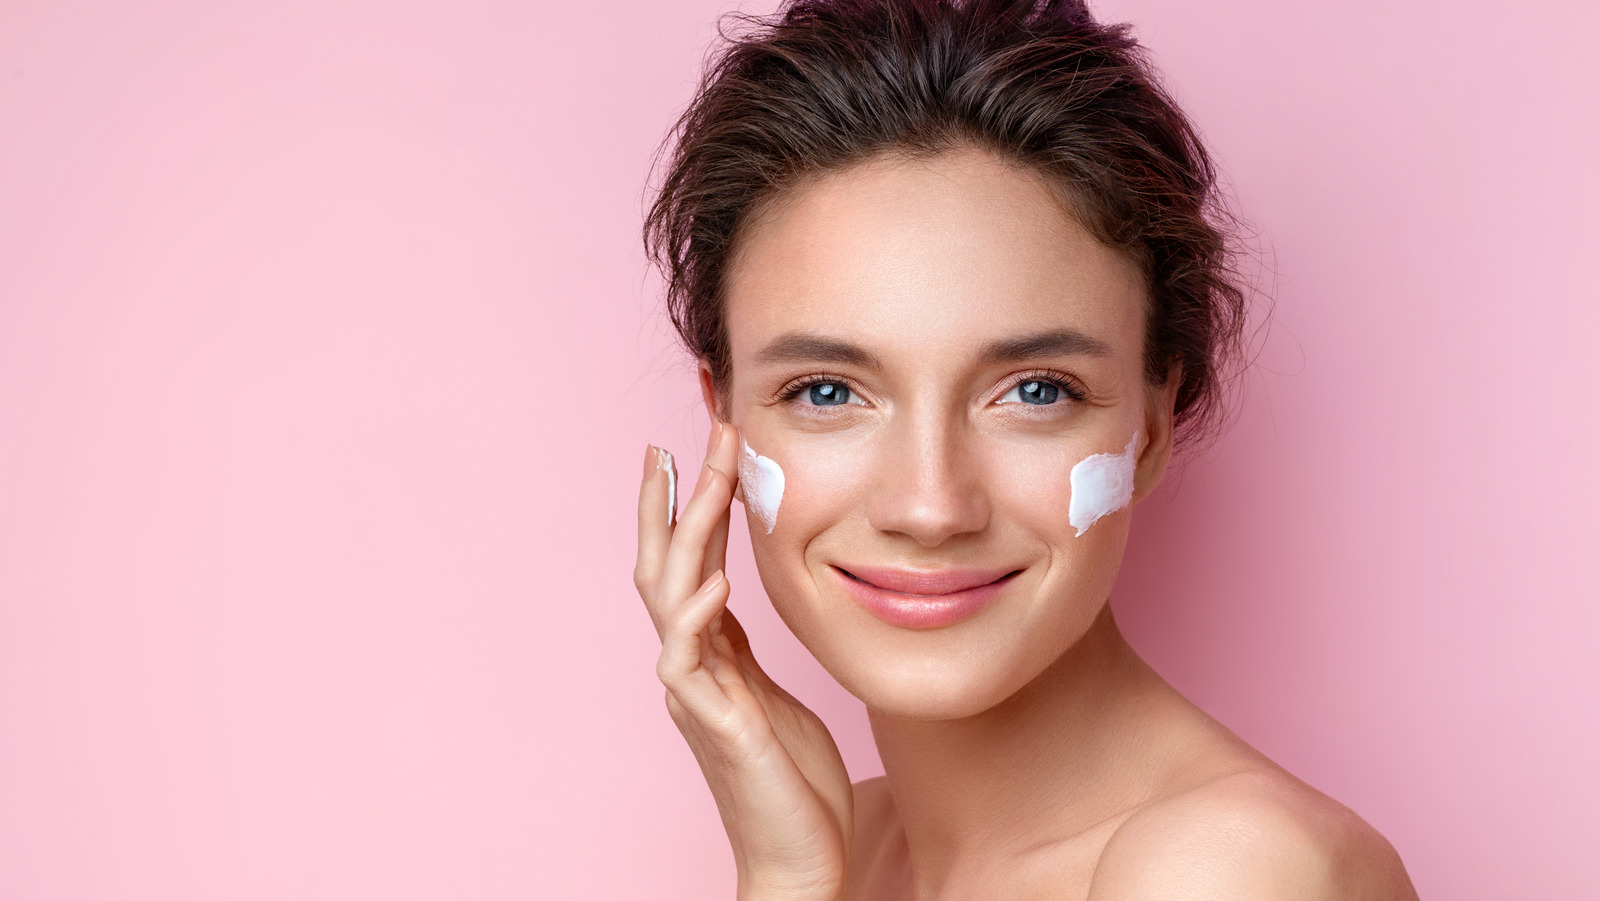 Never Use Body Lotion On Face. Here's Why